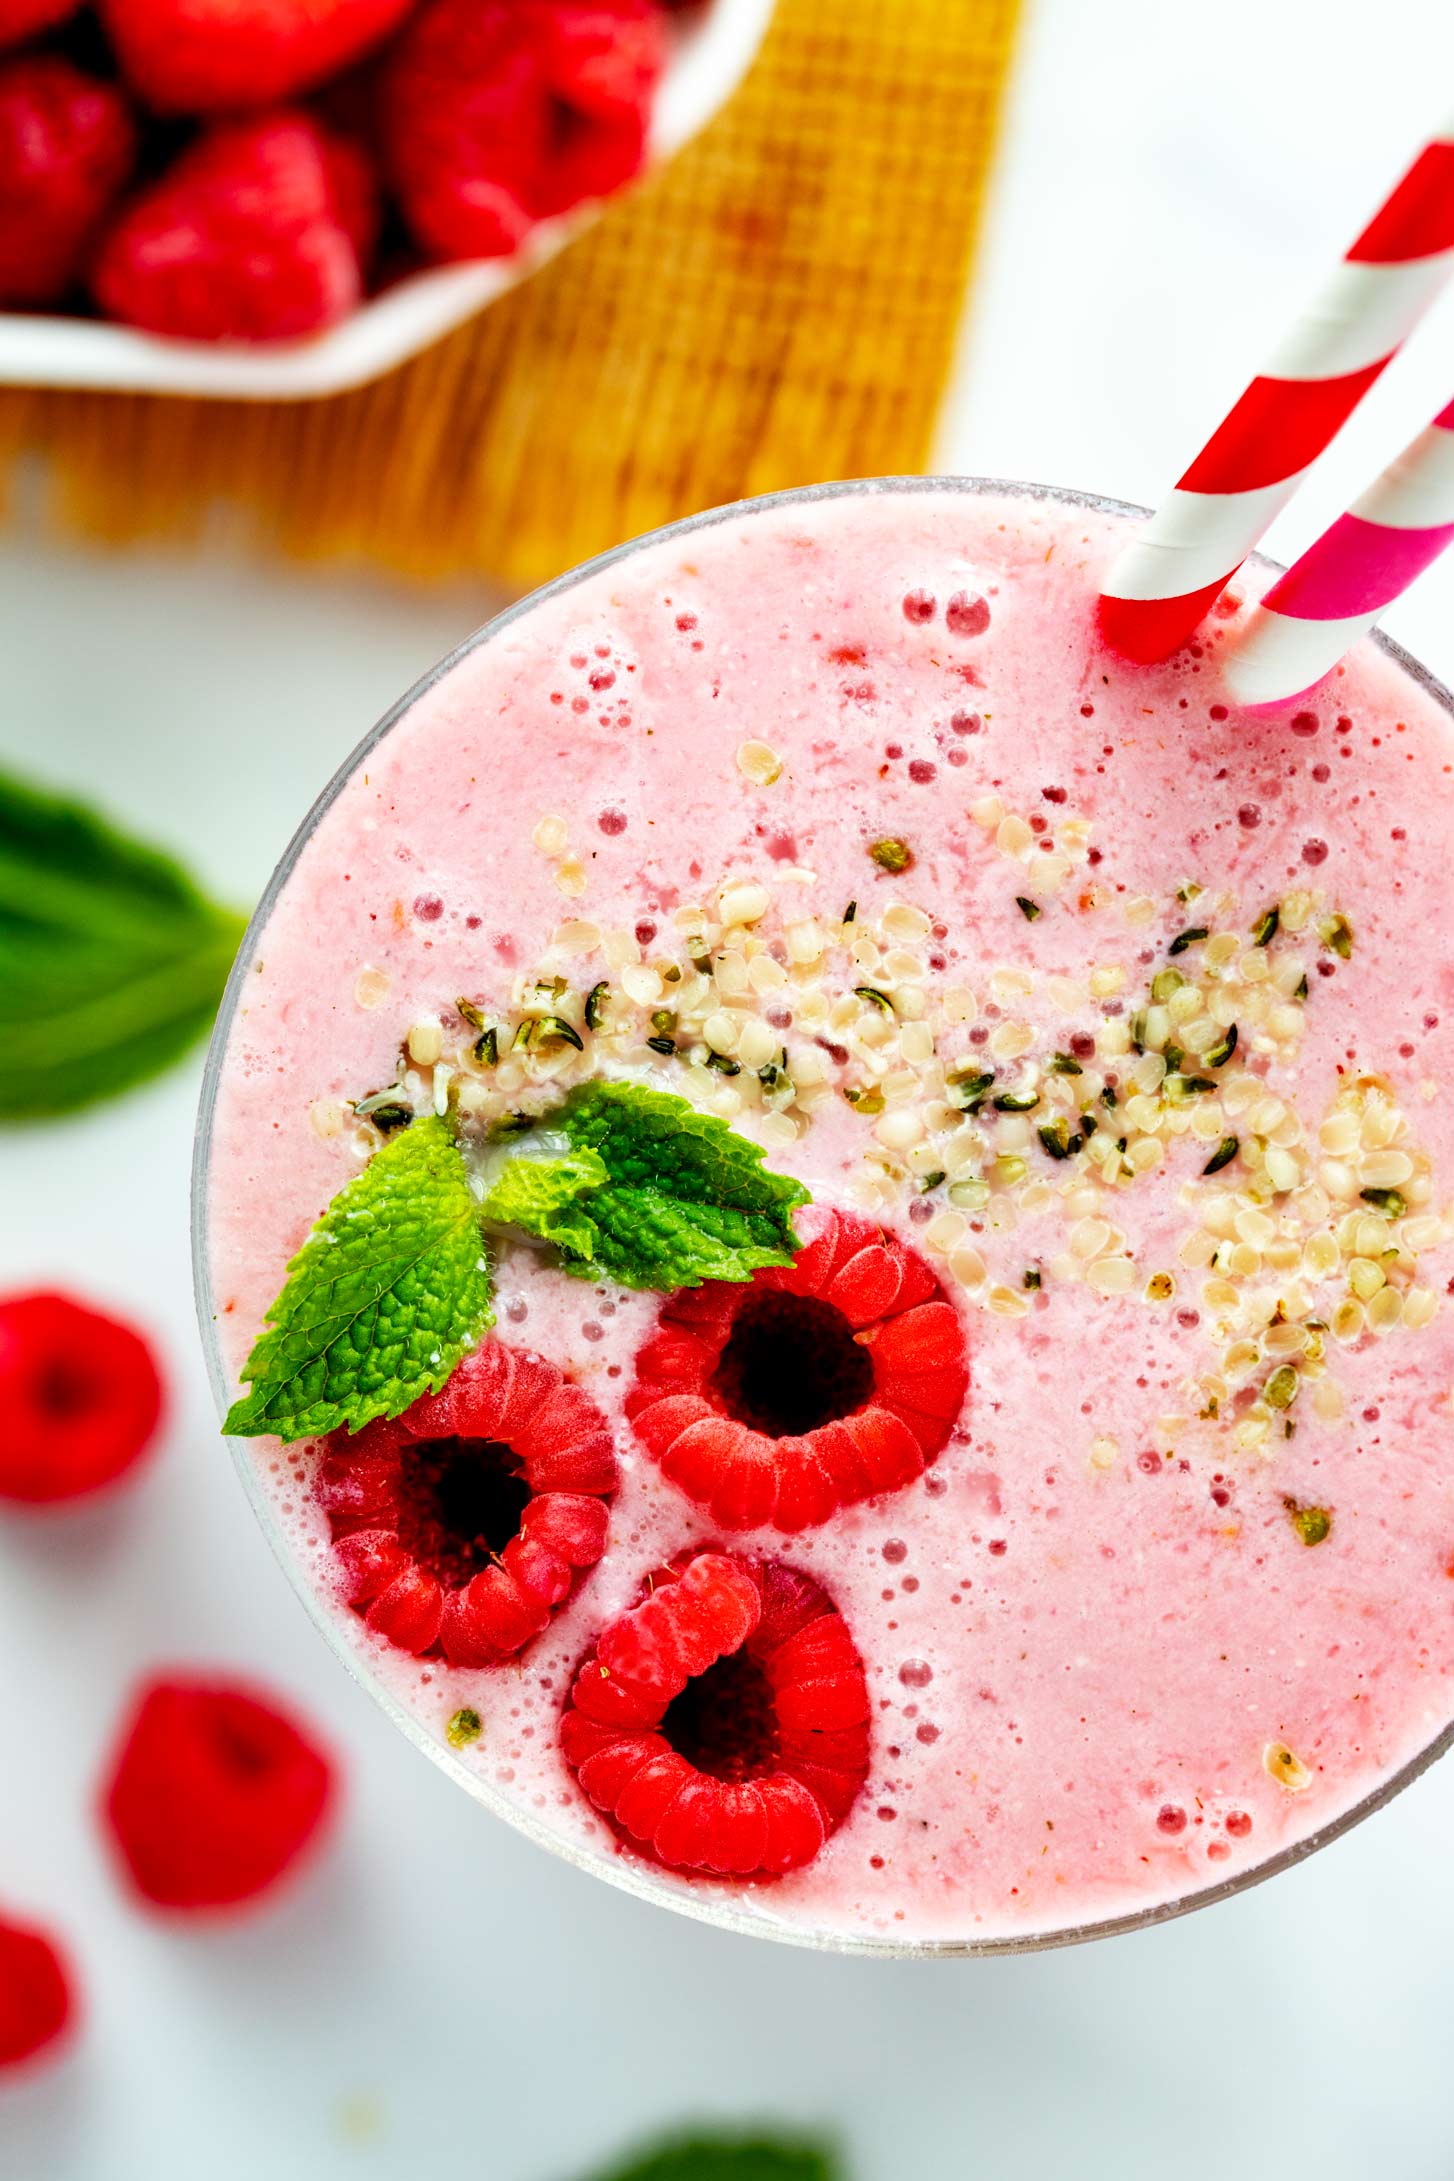 Overhead close up photo of a raspberry smoothie garnished with fresh raspberries, mint, and hemp seeds.